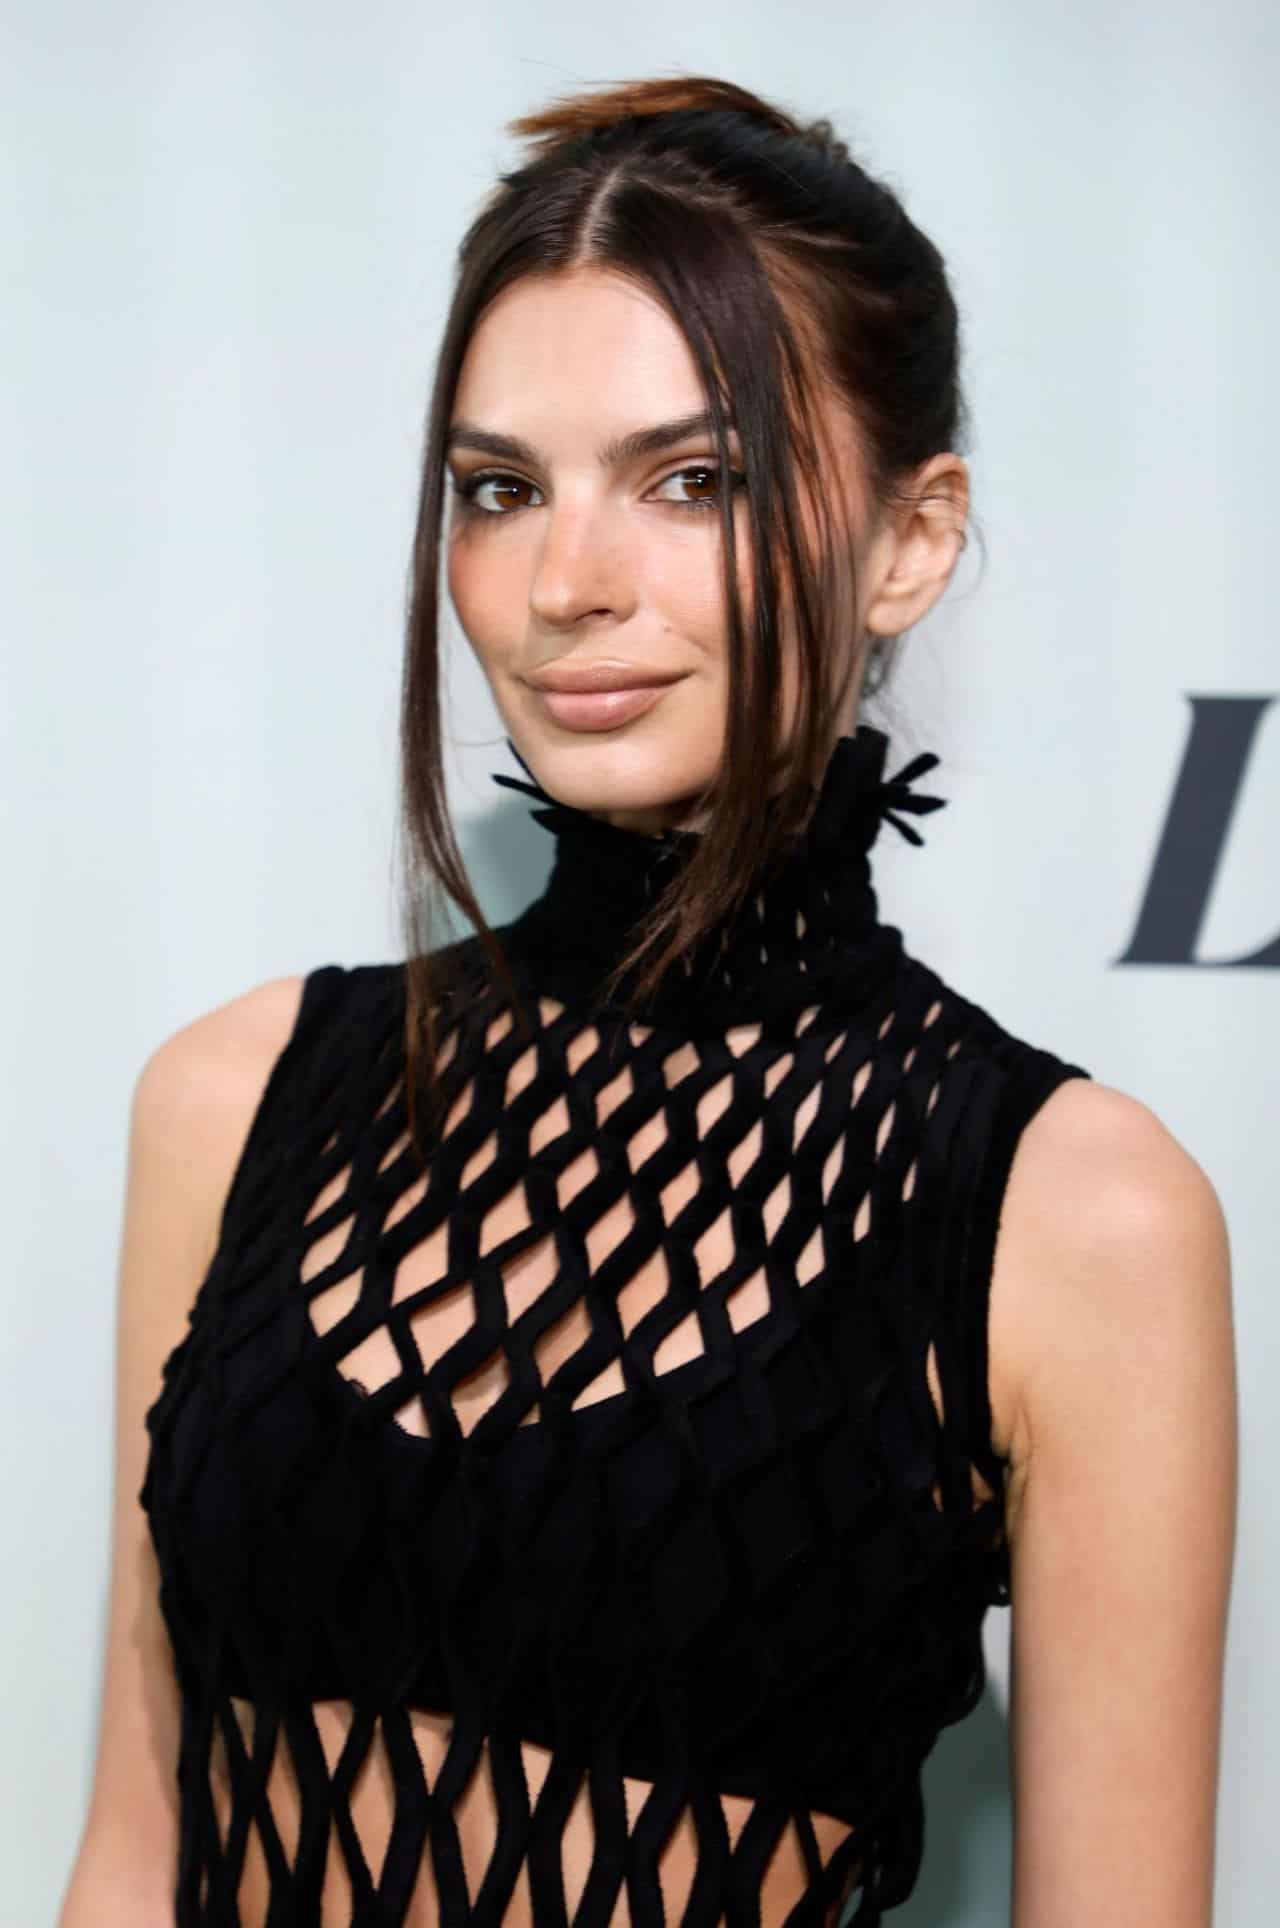 Emily Ratajkowski Stuns at the Variety's 2022 Power Of Women Event in NYC